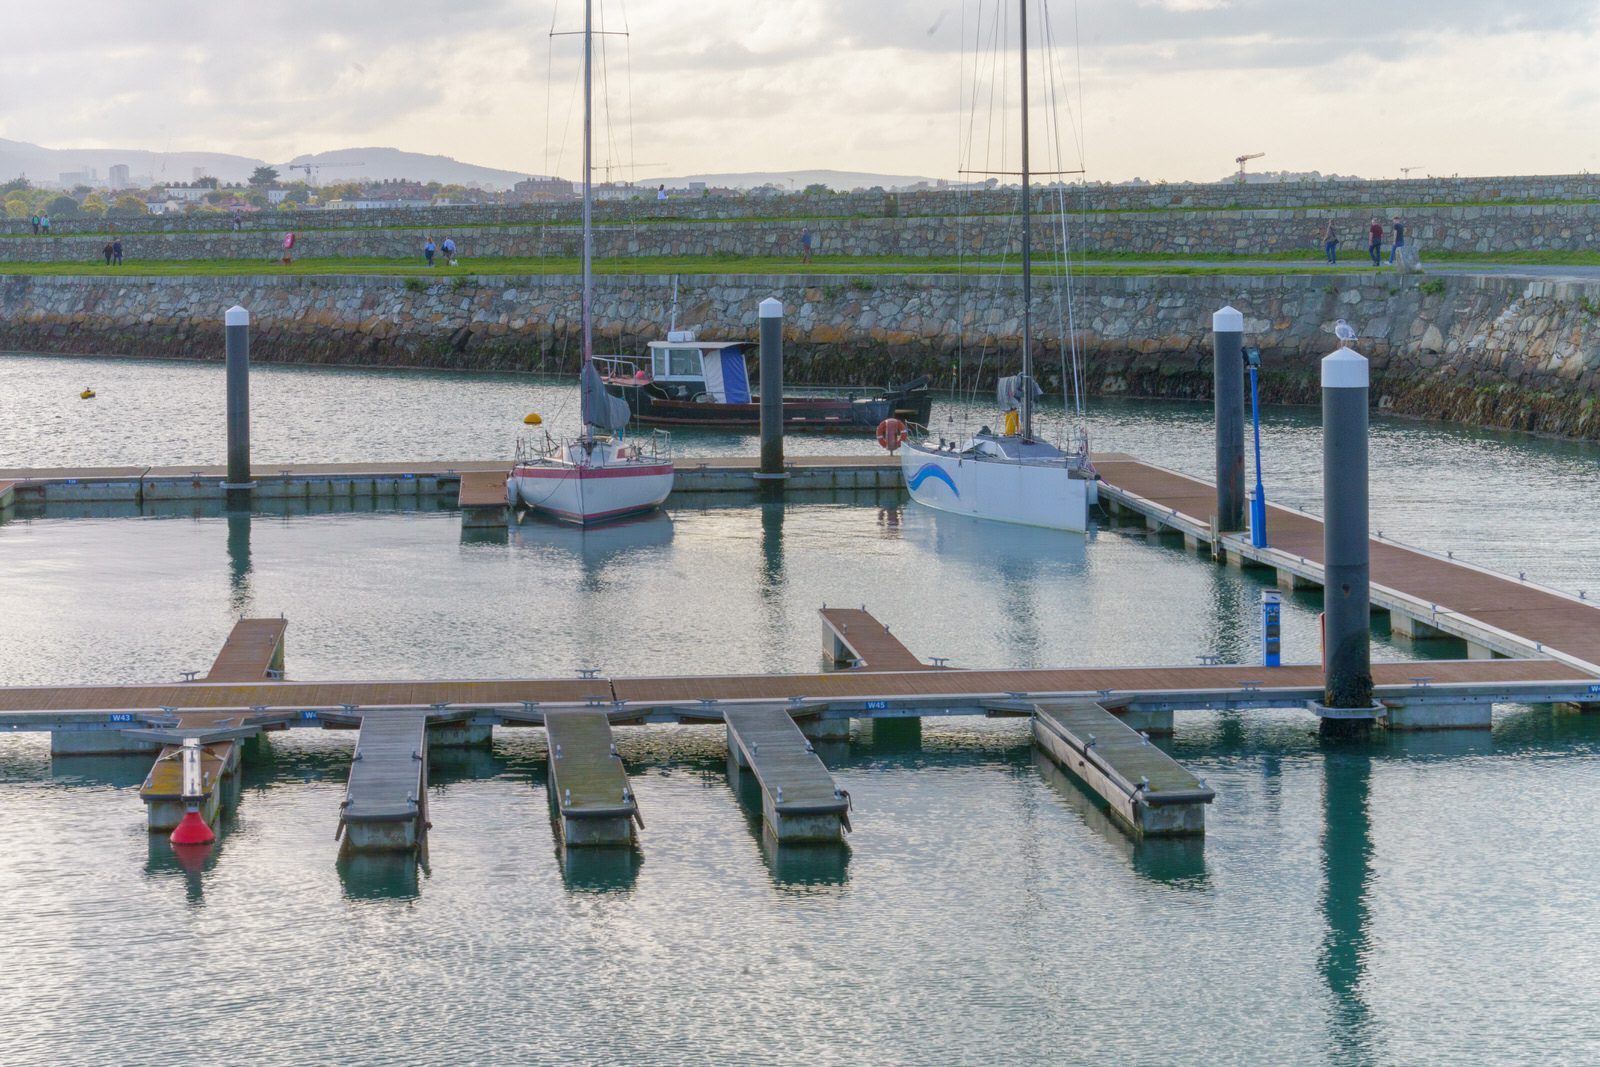 THE SECTION OF THE MARINA NEAR THE WESTERN BREAKWATER [DUN LAOGHAIRE HARBOUR] 002